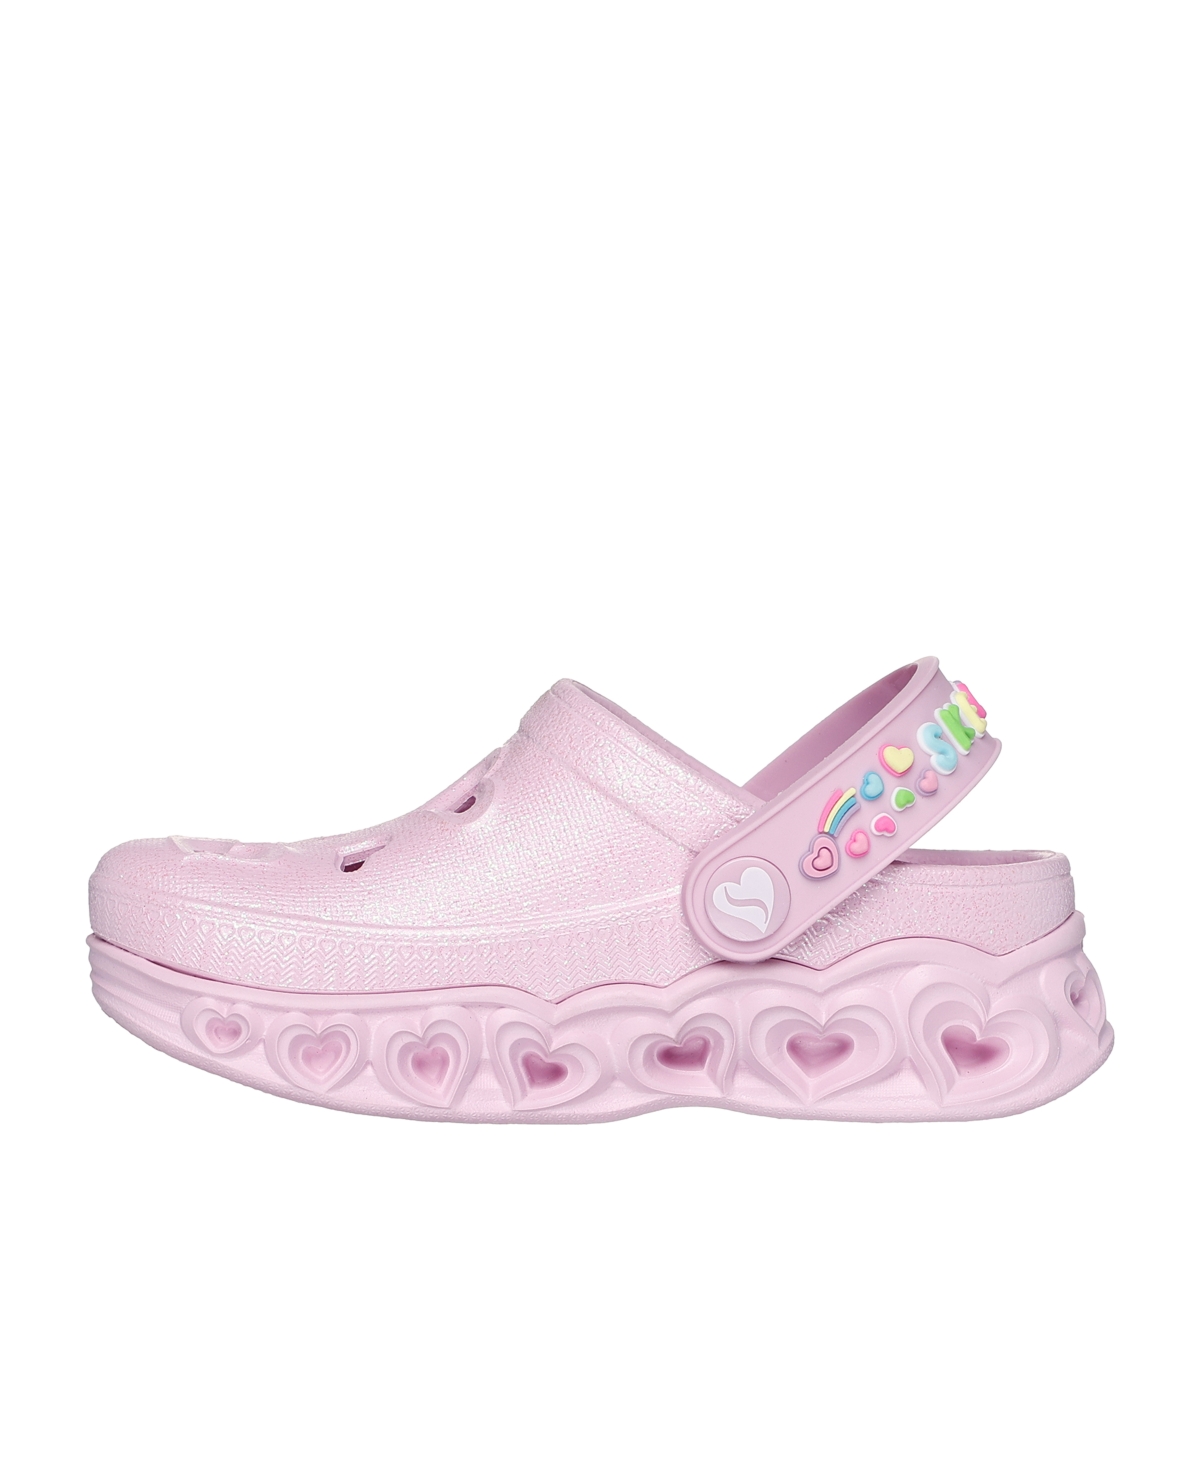 Shop Skechers Toddler Girls' Foamies: Light Hearted Casual Slip-on Clog Shoes From Finish Line In Light Pink